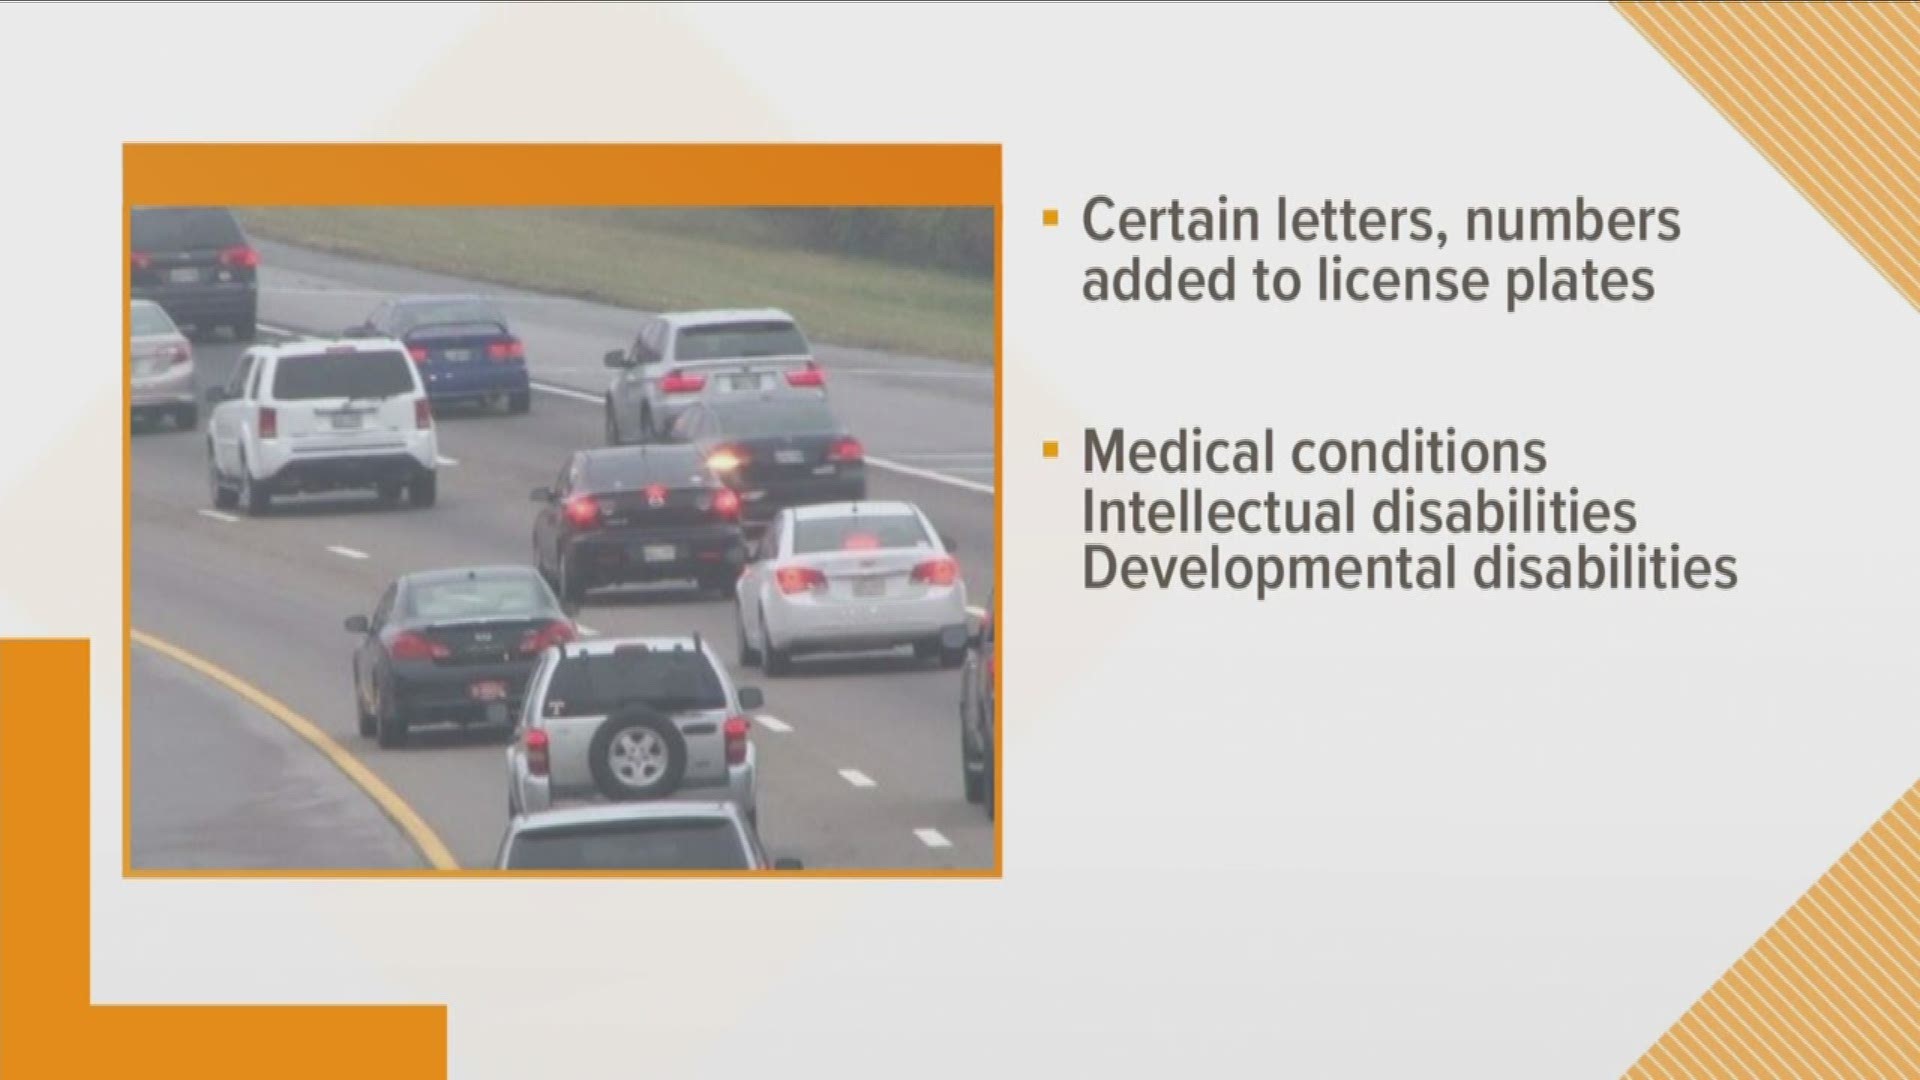 A proposed law would label license plates on vehicles driven by people with medical, intellectual or developmental disabilities to help protect them on the road.